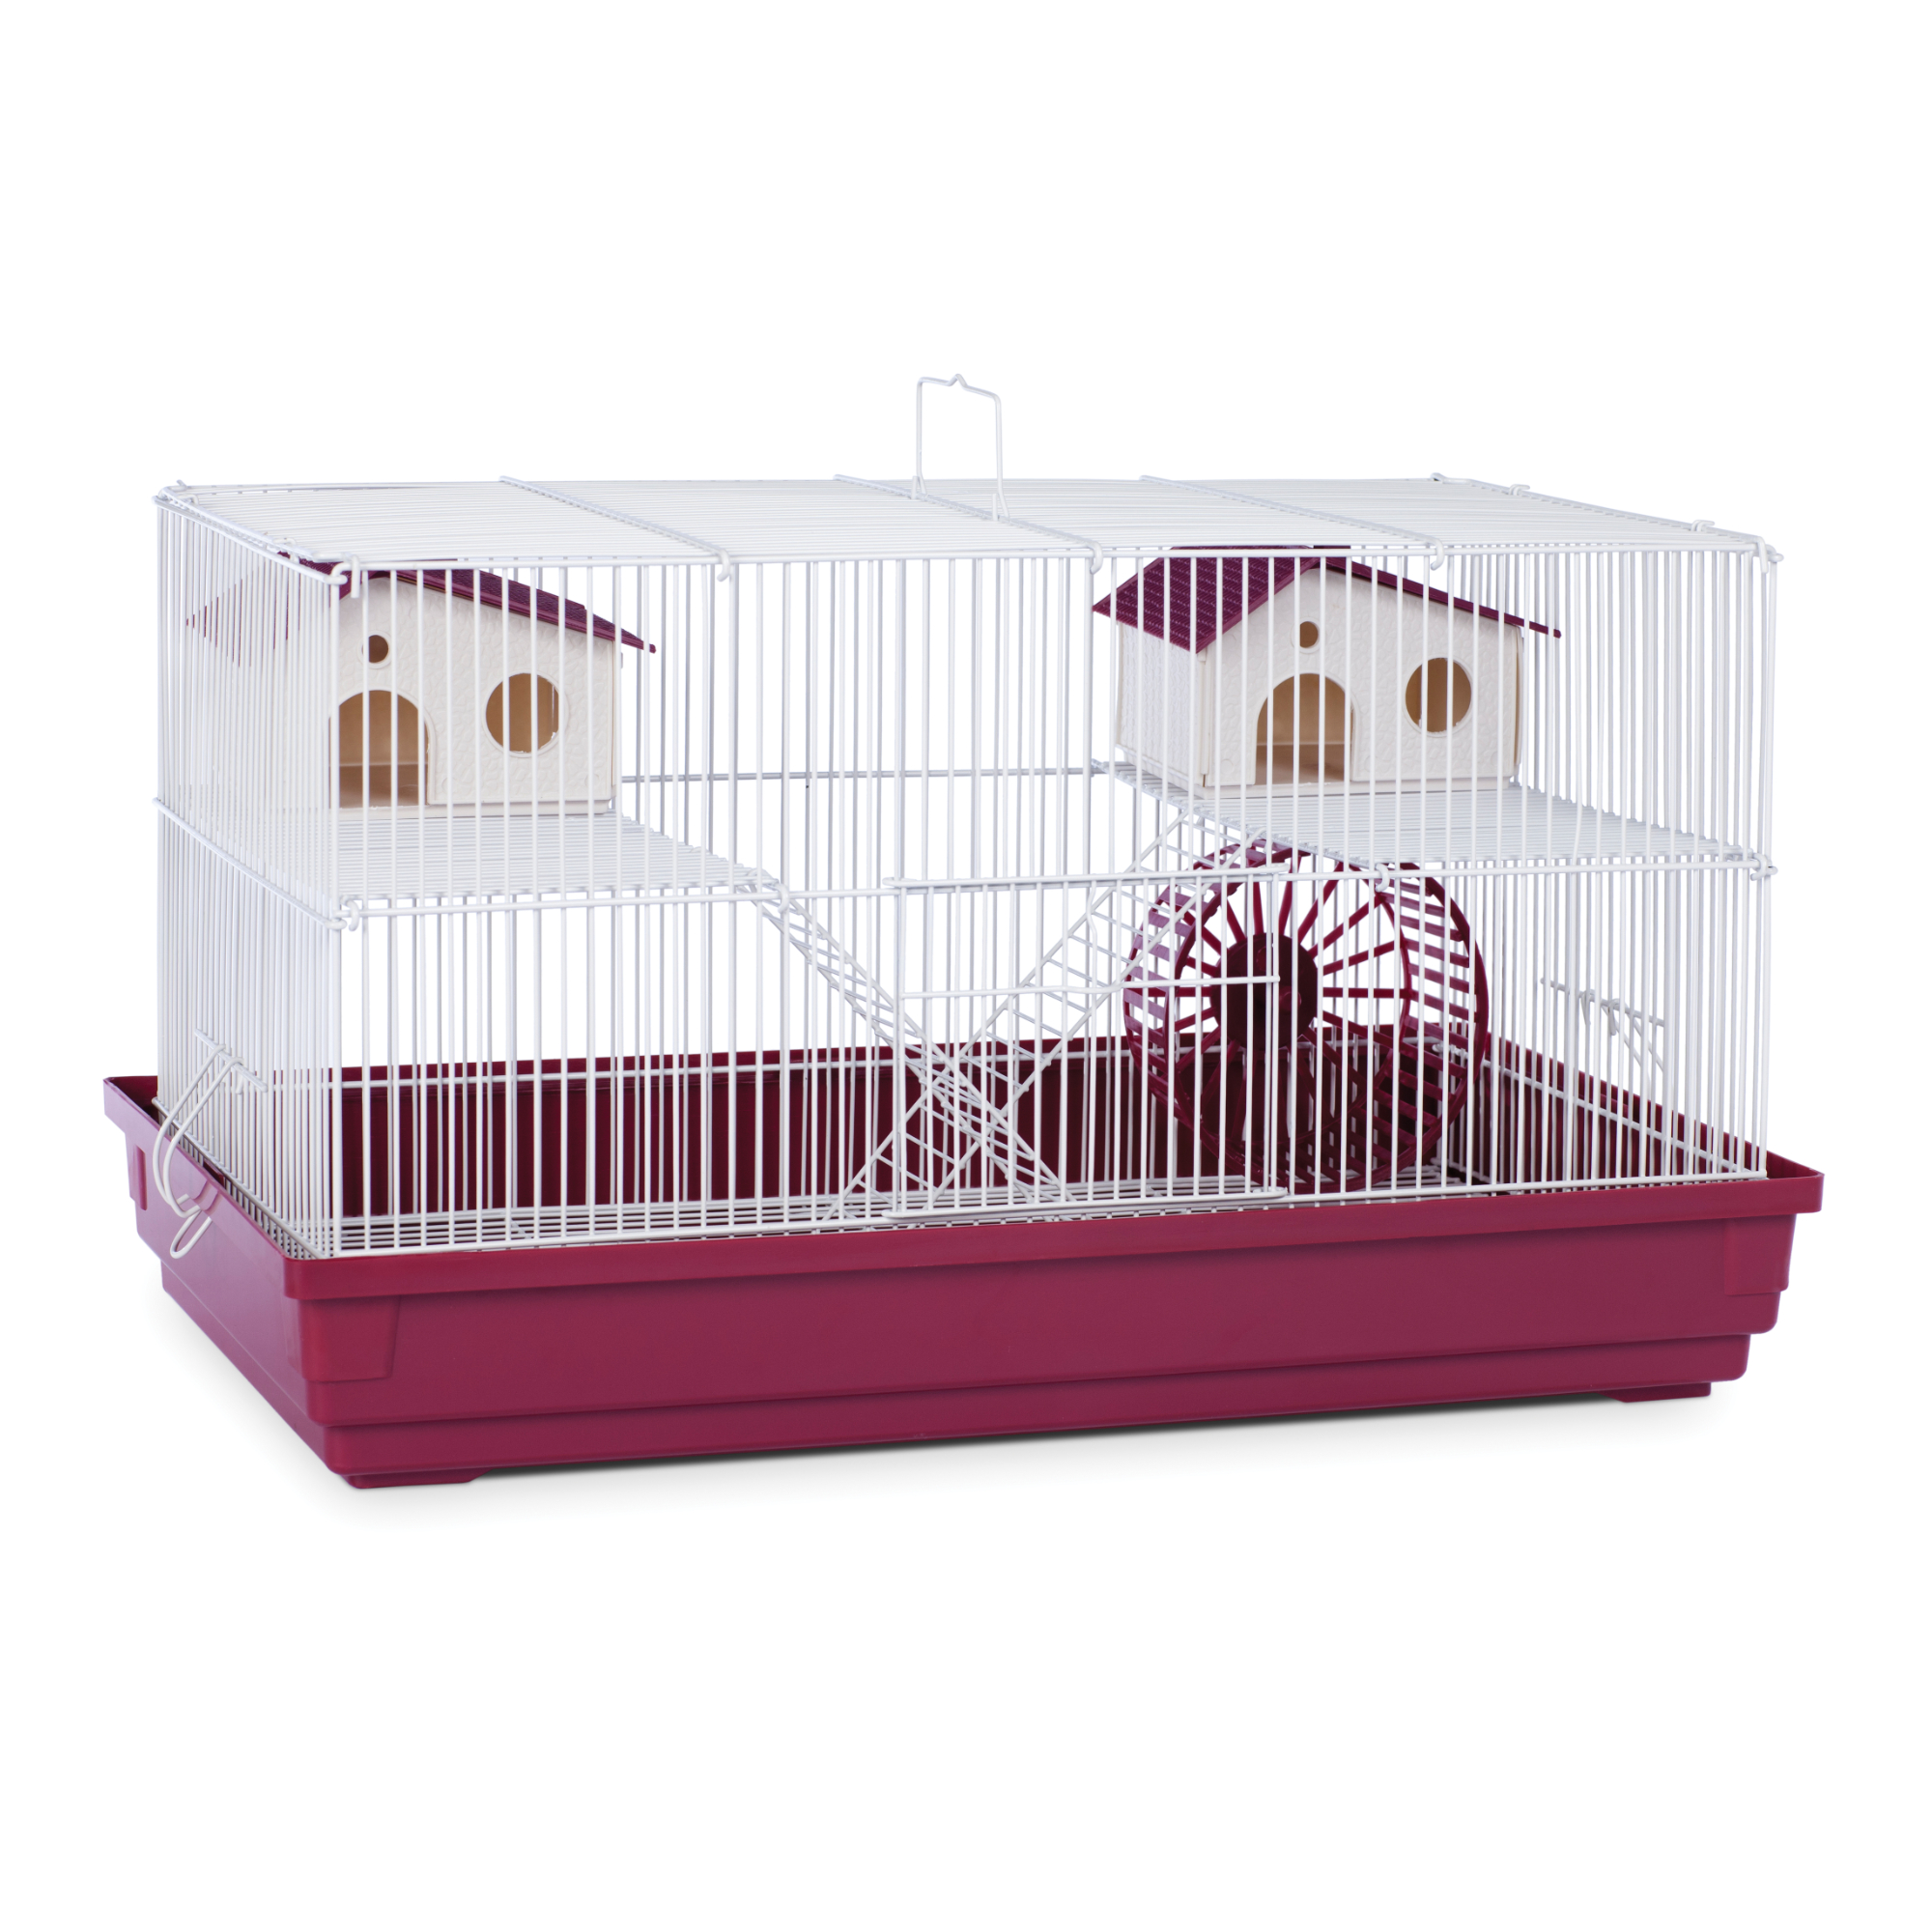 Prevue Pet Products Deluxe Hamster & Gerbil Cage - image 1 of 12